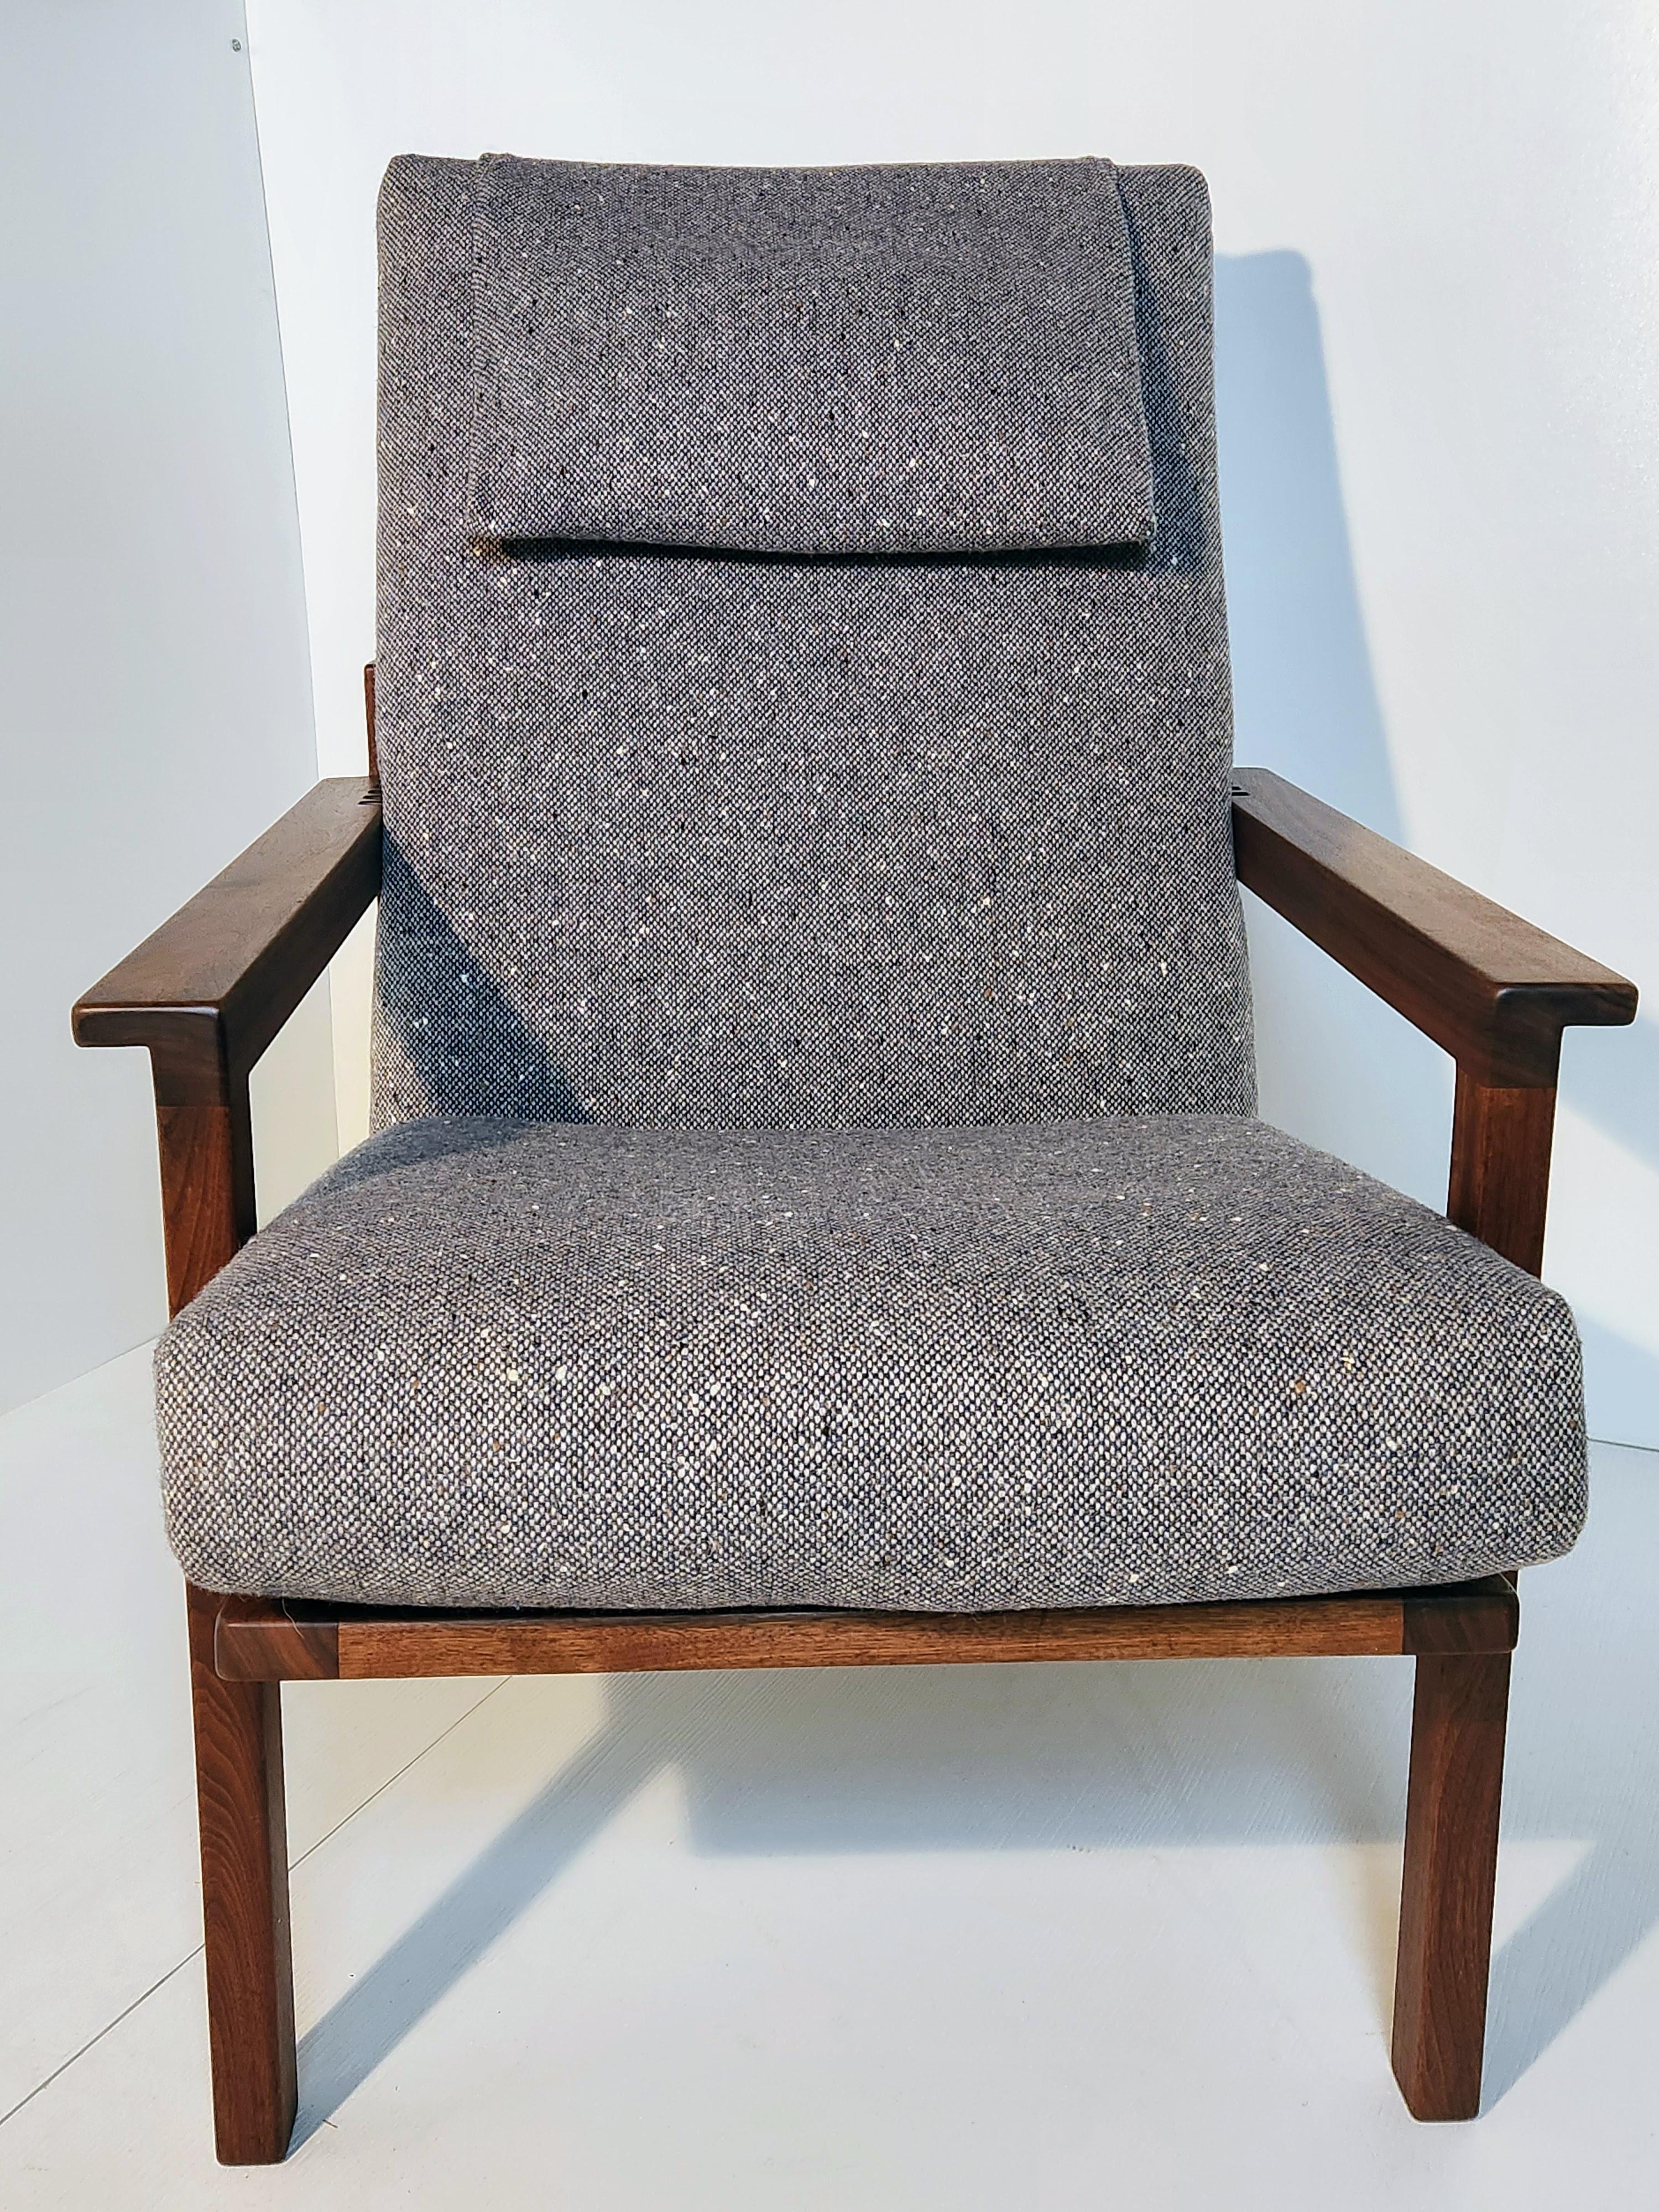 Walnut Adjustable Lounge Chair Arden Riddle (1921-2011) pre-1965 For Sale 3